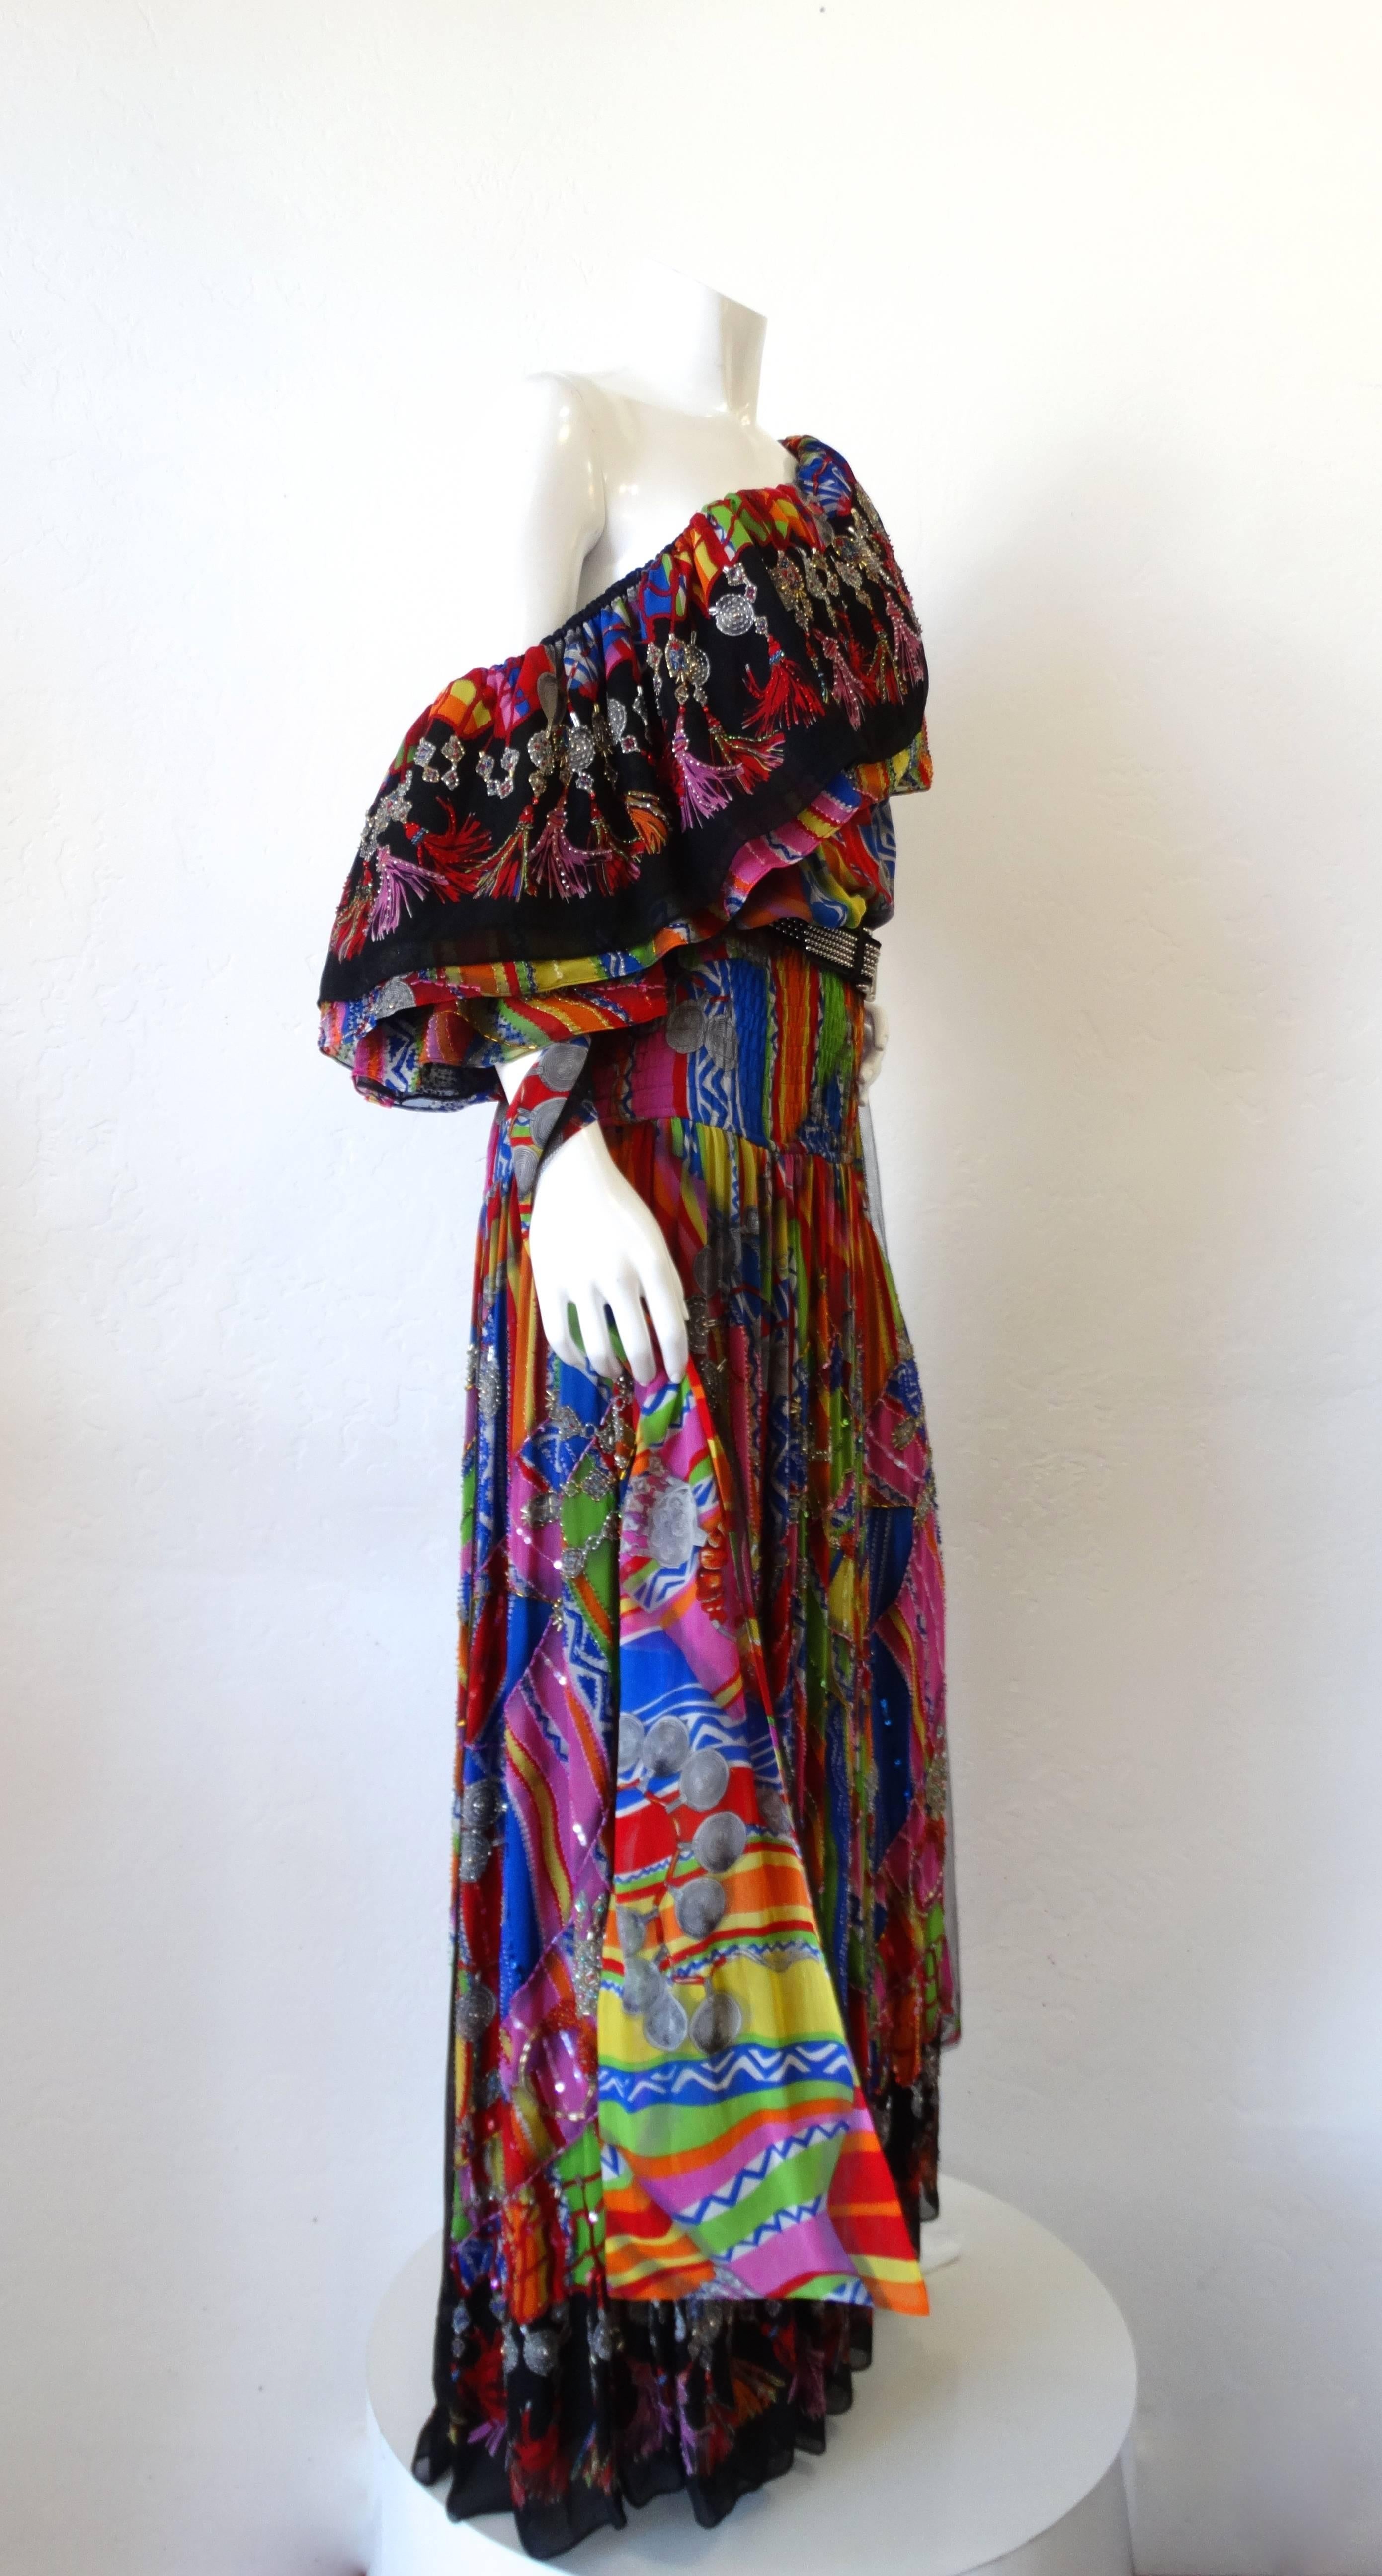 Channel your inner flamenco dancer in our 1980s Diane Freis dress! Sexy off the shoulder neckline with layered ruffles and tassel print for extra drama! Elasticized waist and carwash style skirt, so much movement in this piece! Psychedelic rainbow